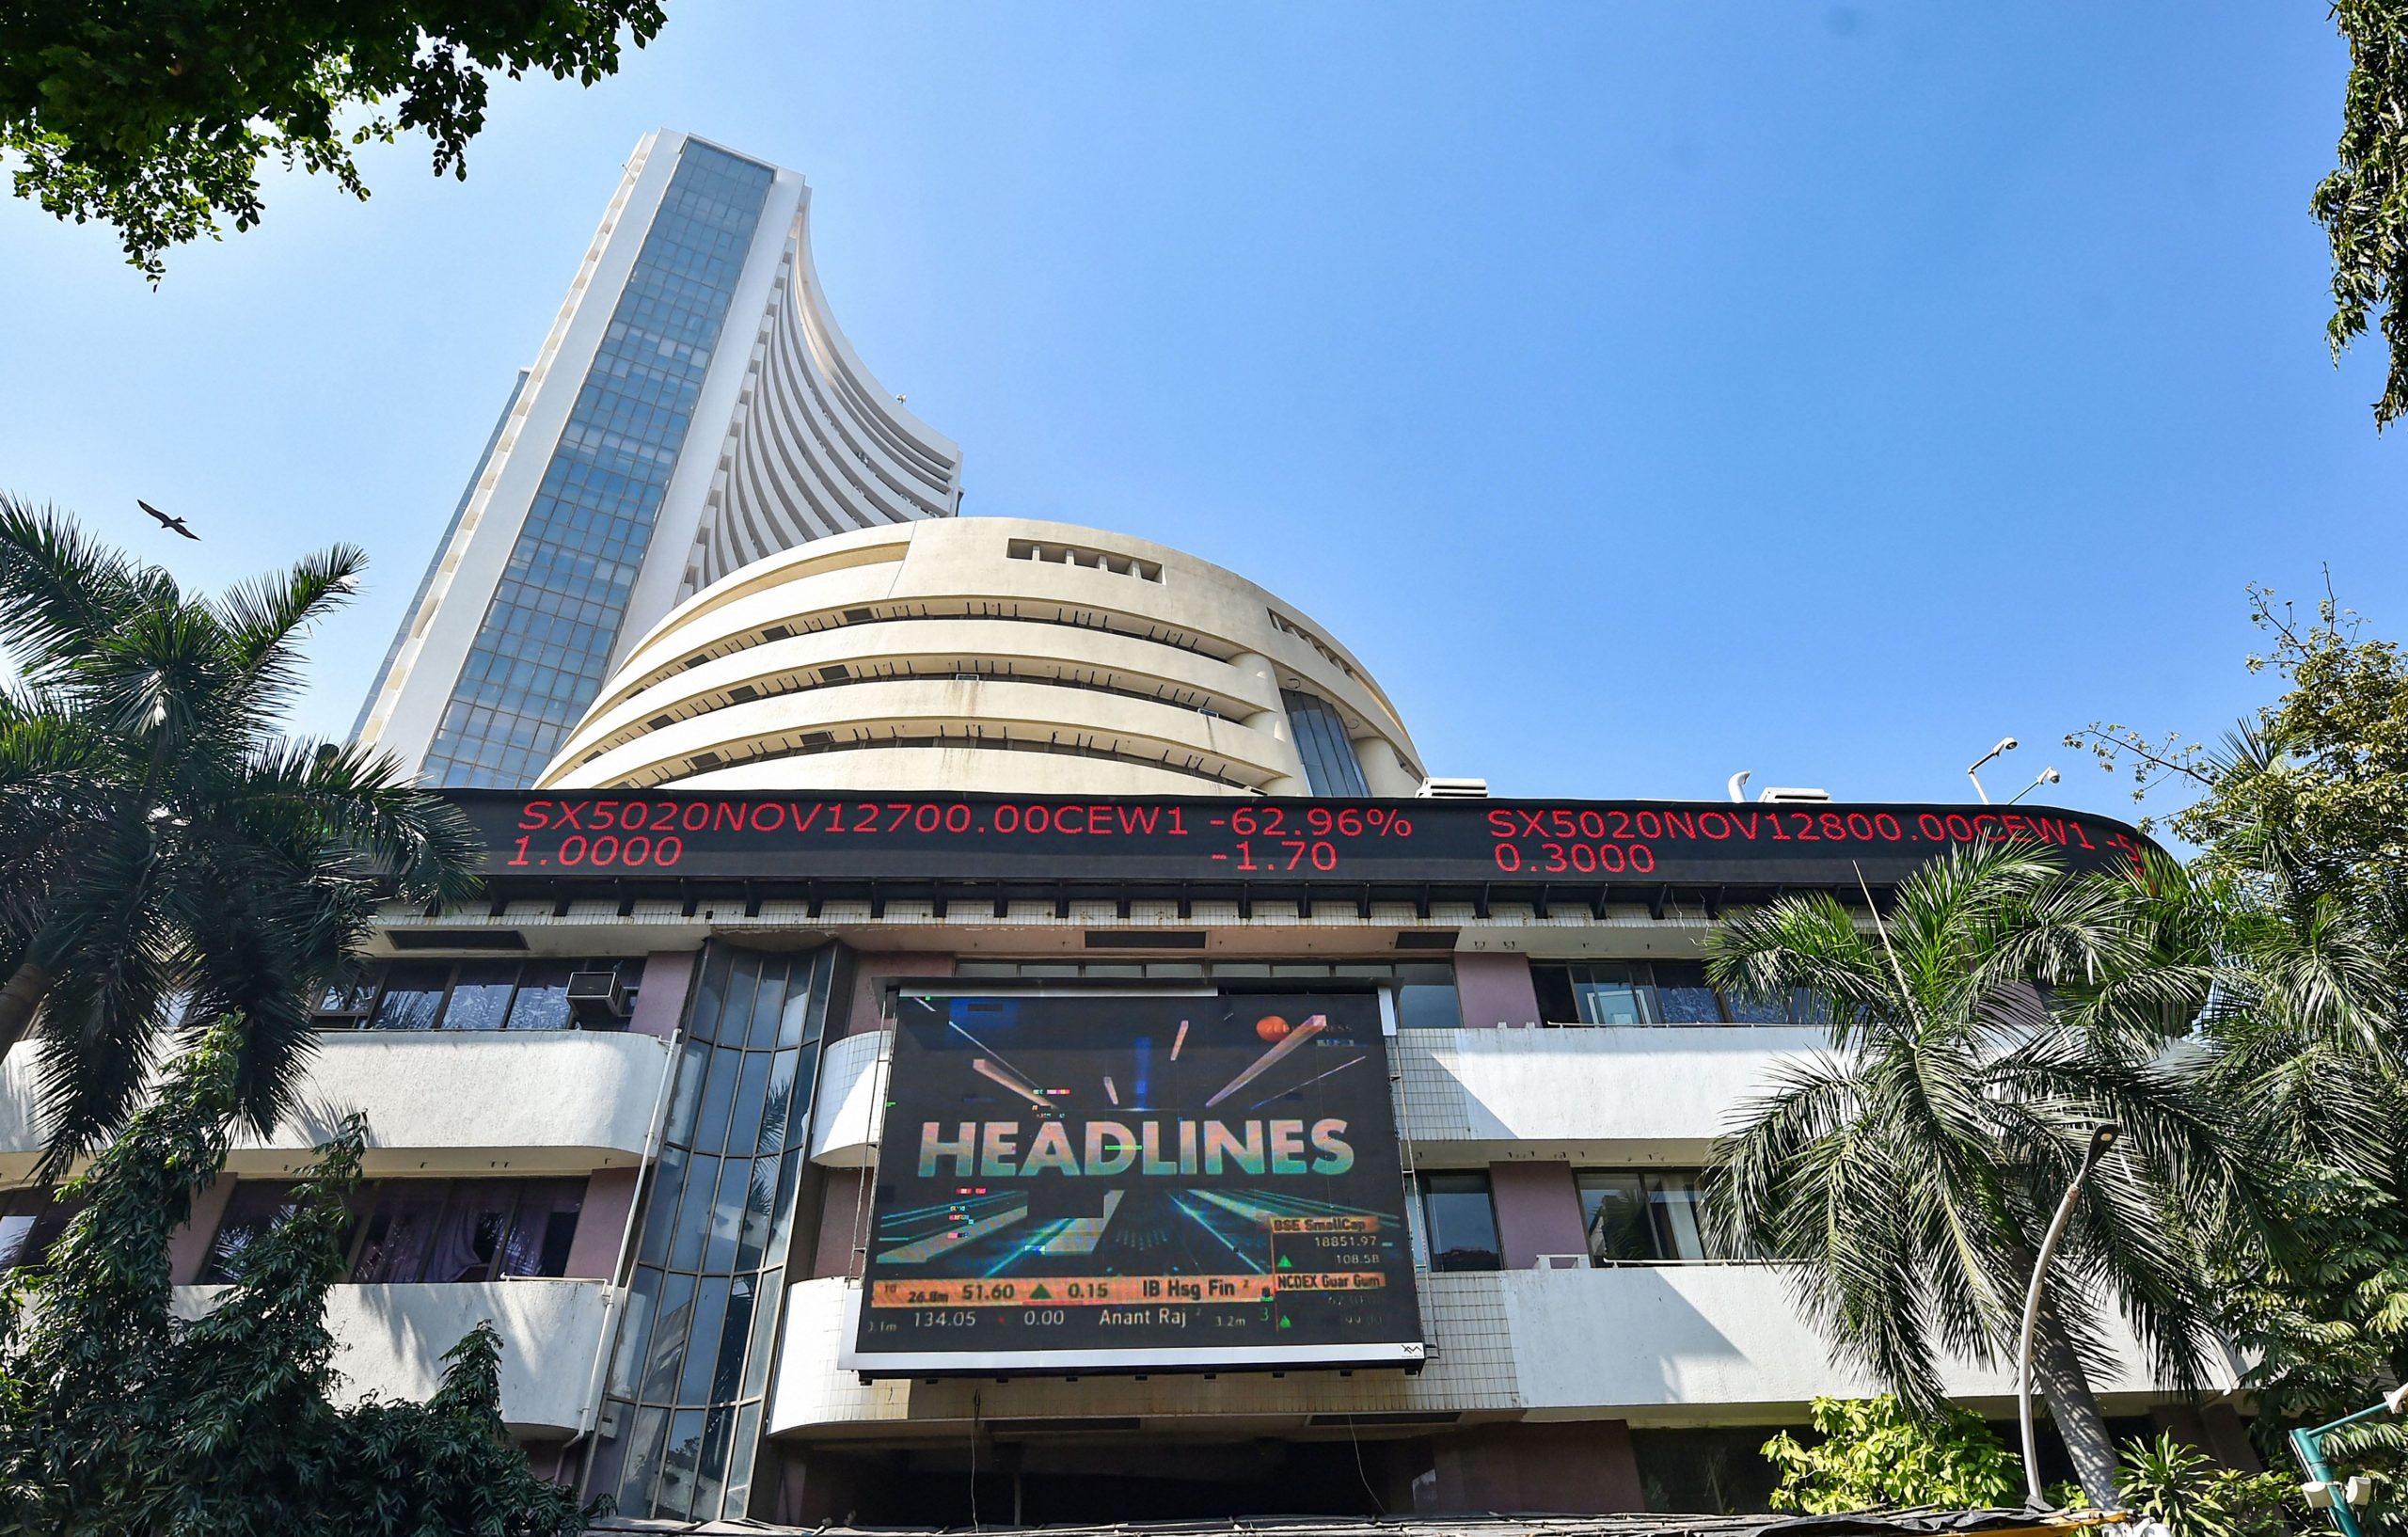 Trending Stocks: HUL, Ambuja Cements, Vedanta and others in news today